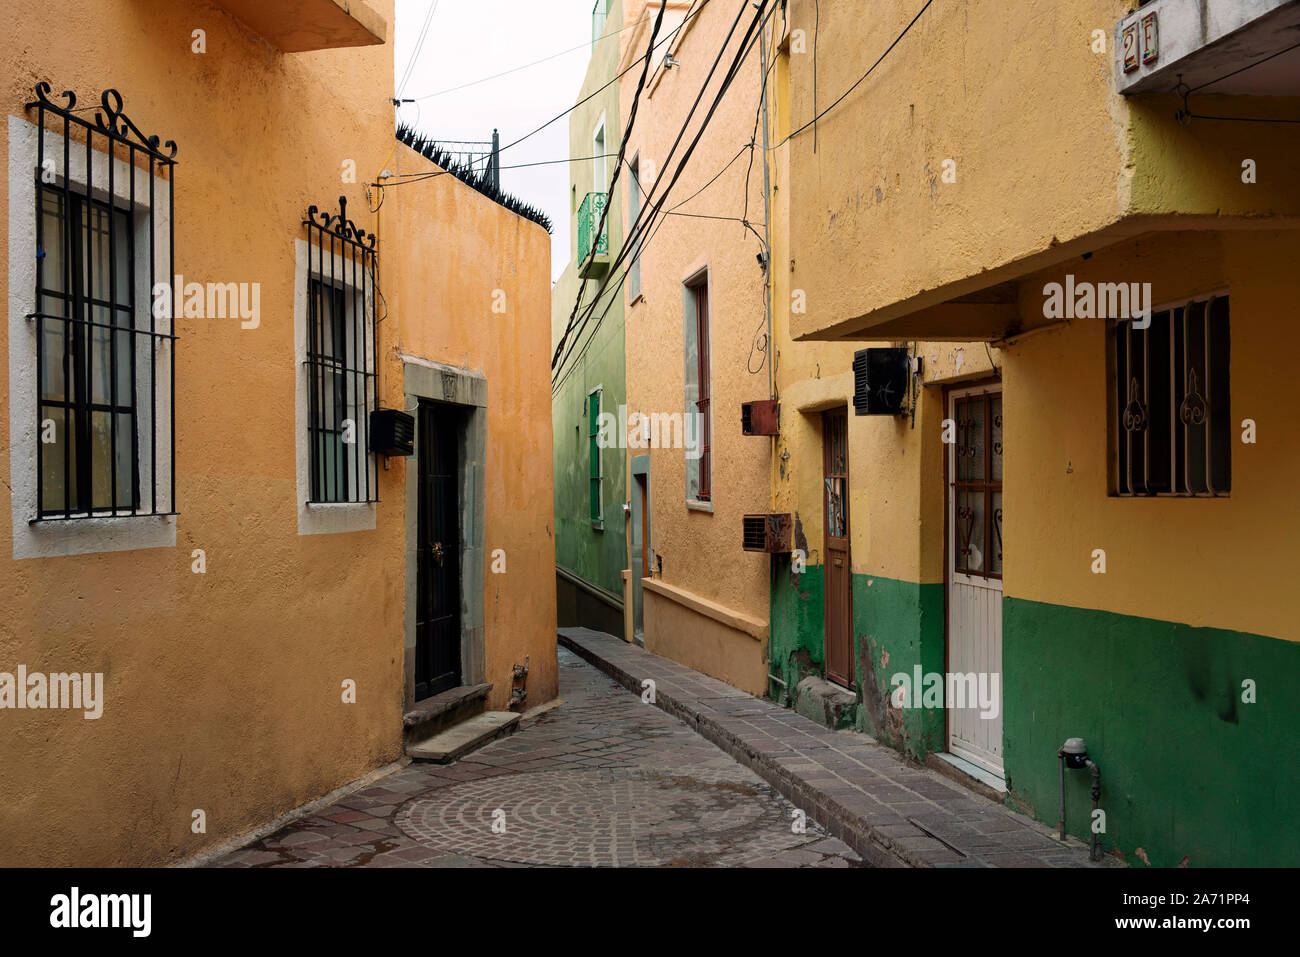 Unusual layout of residential houses with a super narrow alleyway. Guanajuato, Mexico. Jun 2019 Stock Photo